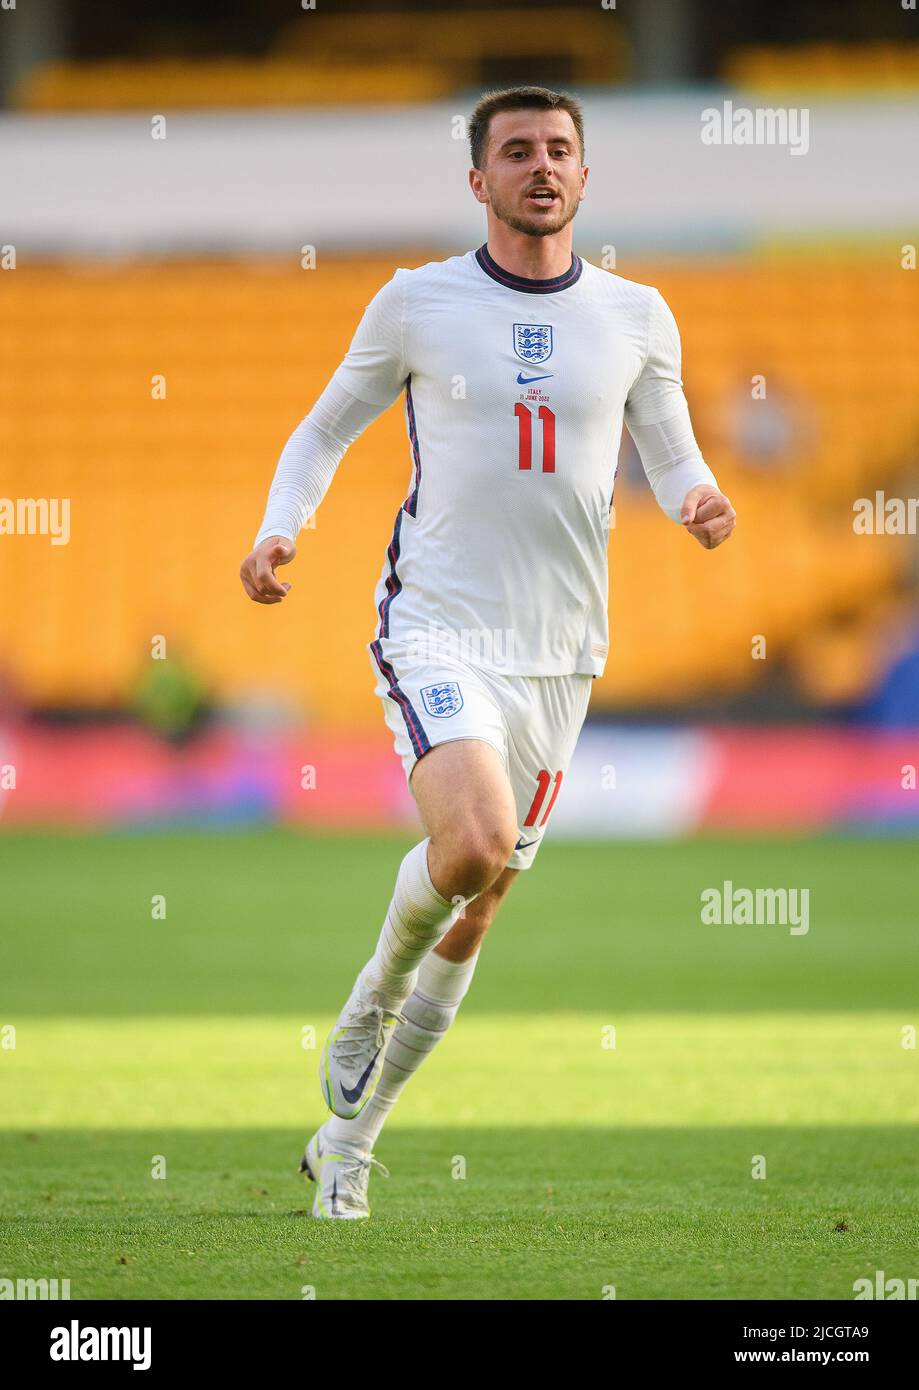 11 Jun 2022 - England v Italy - UEFA Nations League - Group 3 - Molineux Stadium  England's Mason Mount during the match against Italy. Picture Credit : © Mark Pain / Alamy Live News Stock Photo